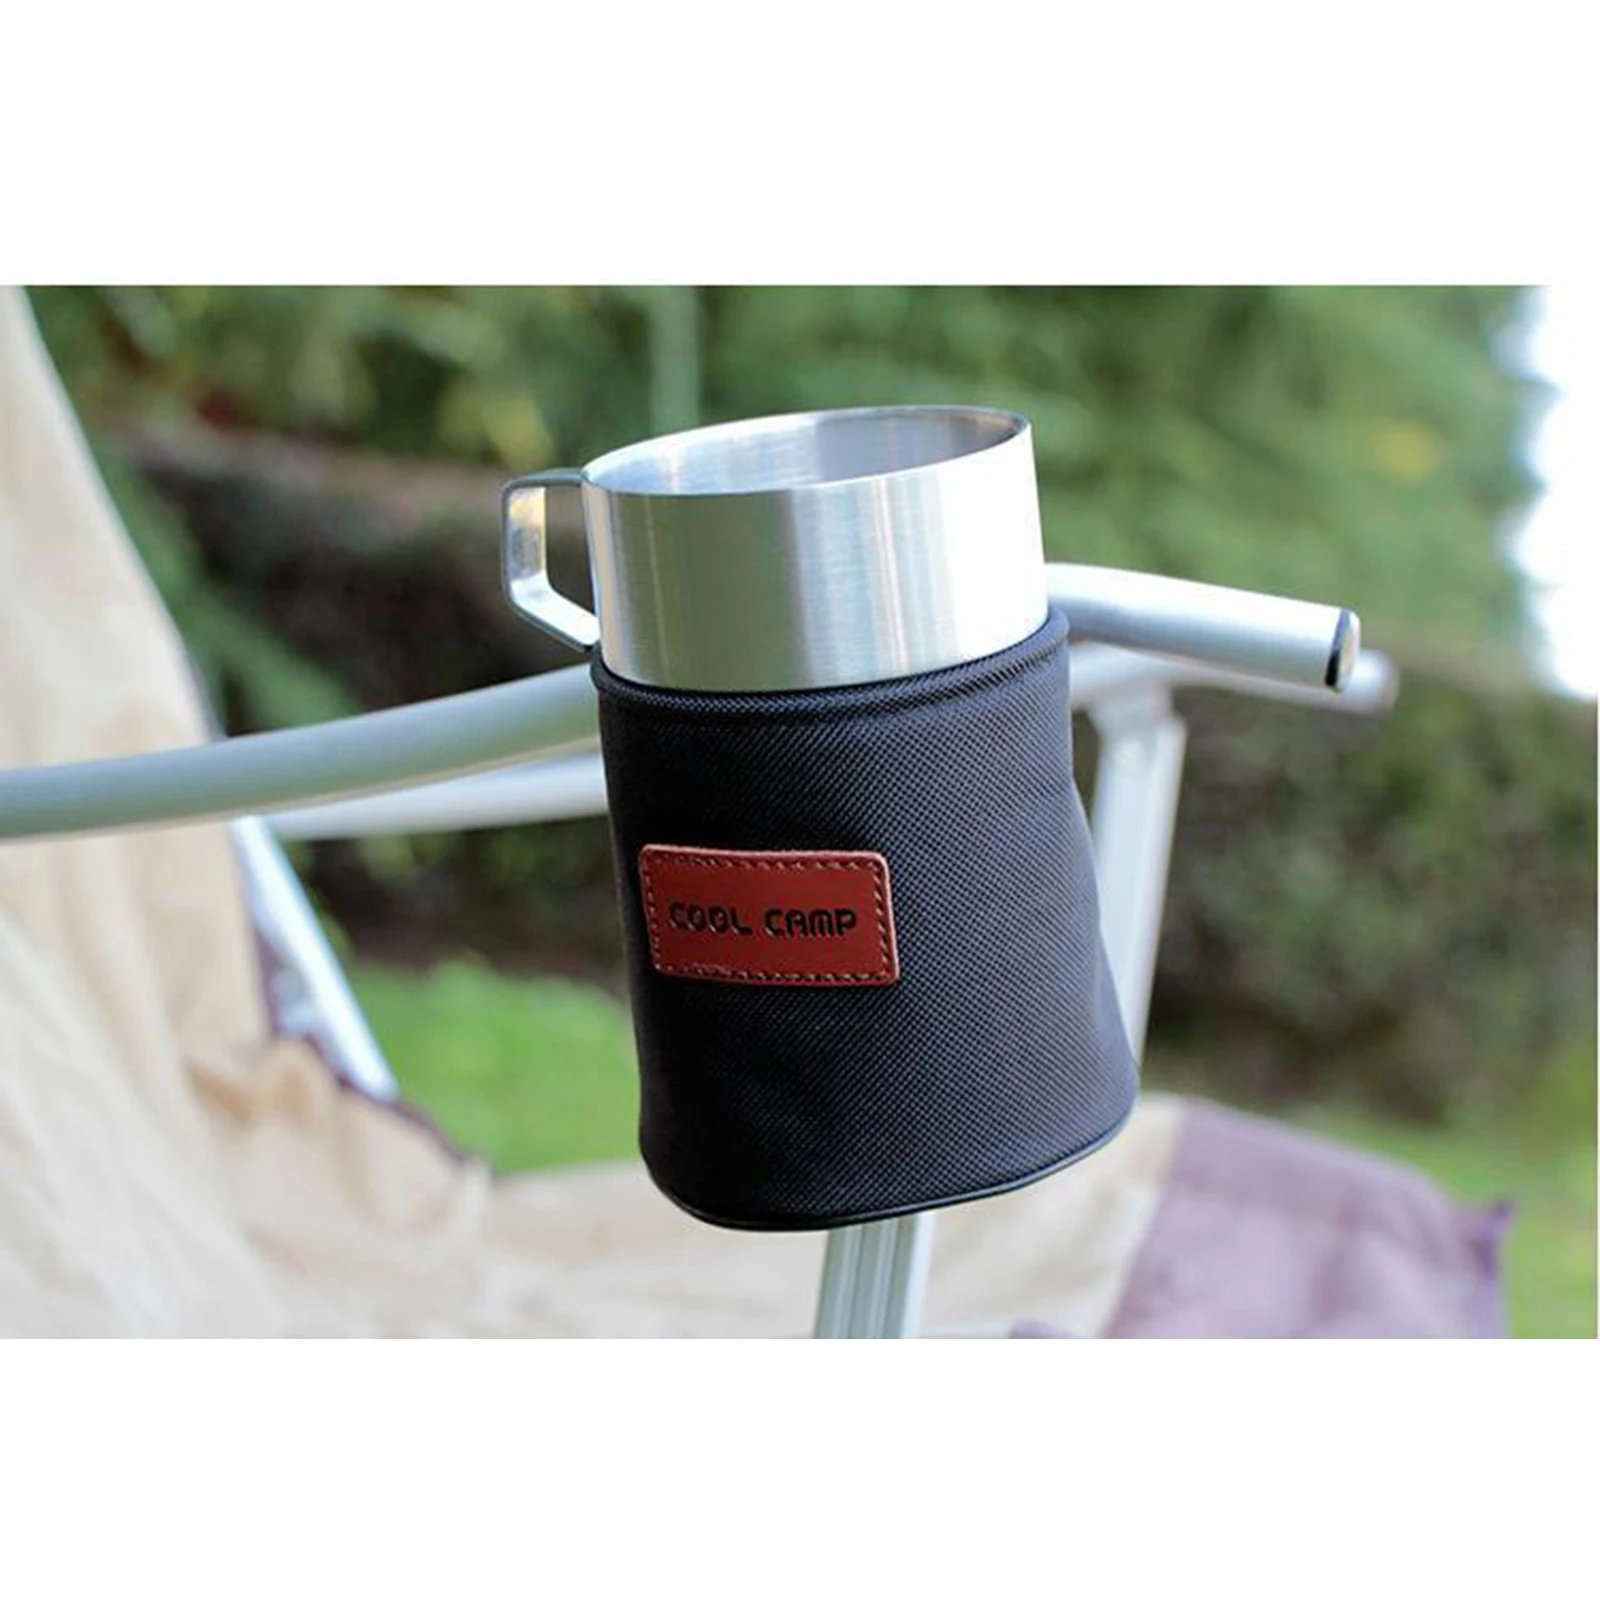 Bike Water Cup Holder Bracket Stand Chair Side Bag for Cycling